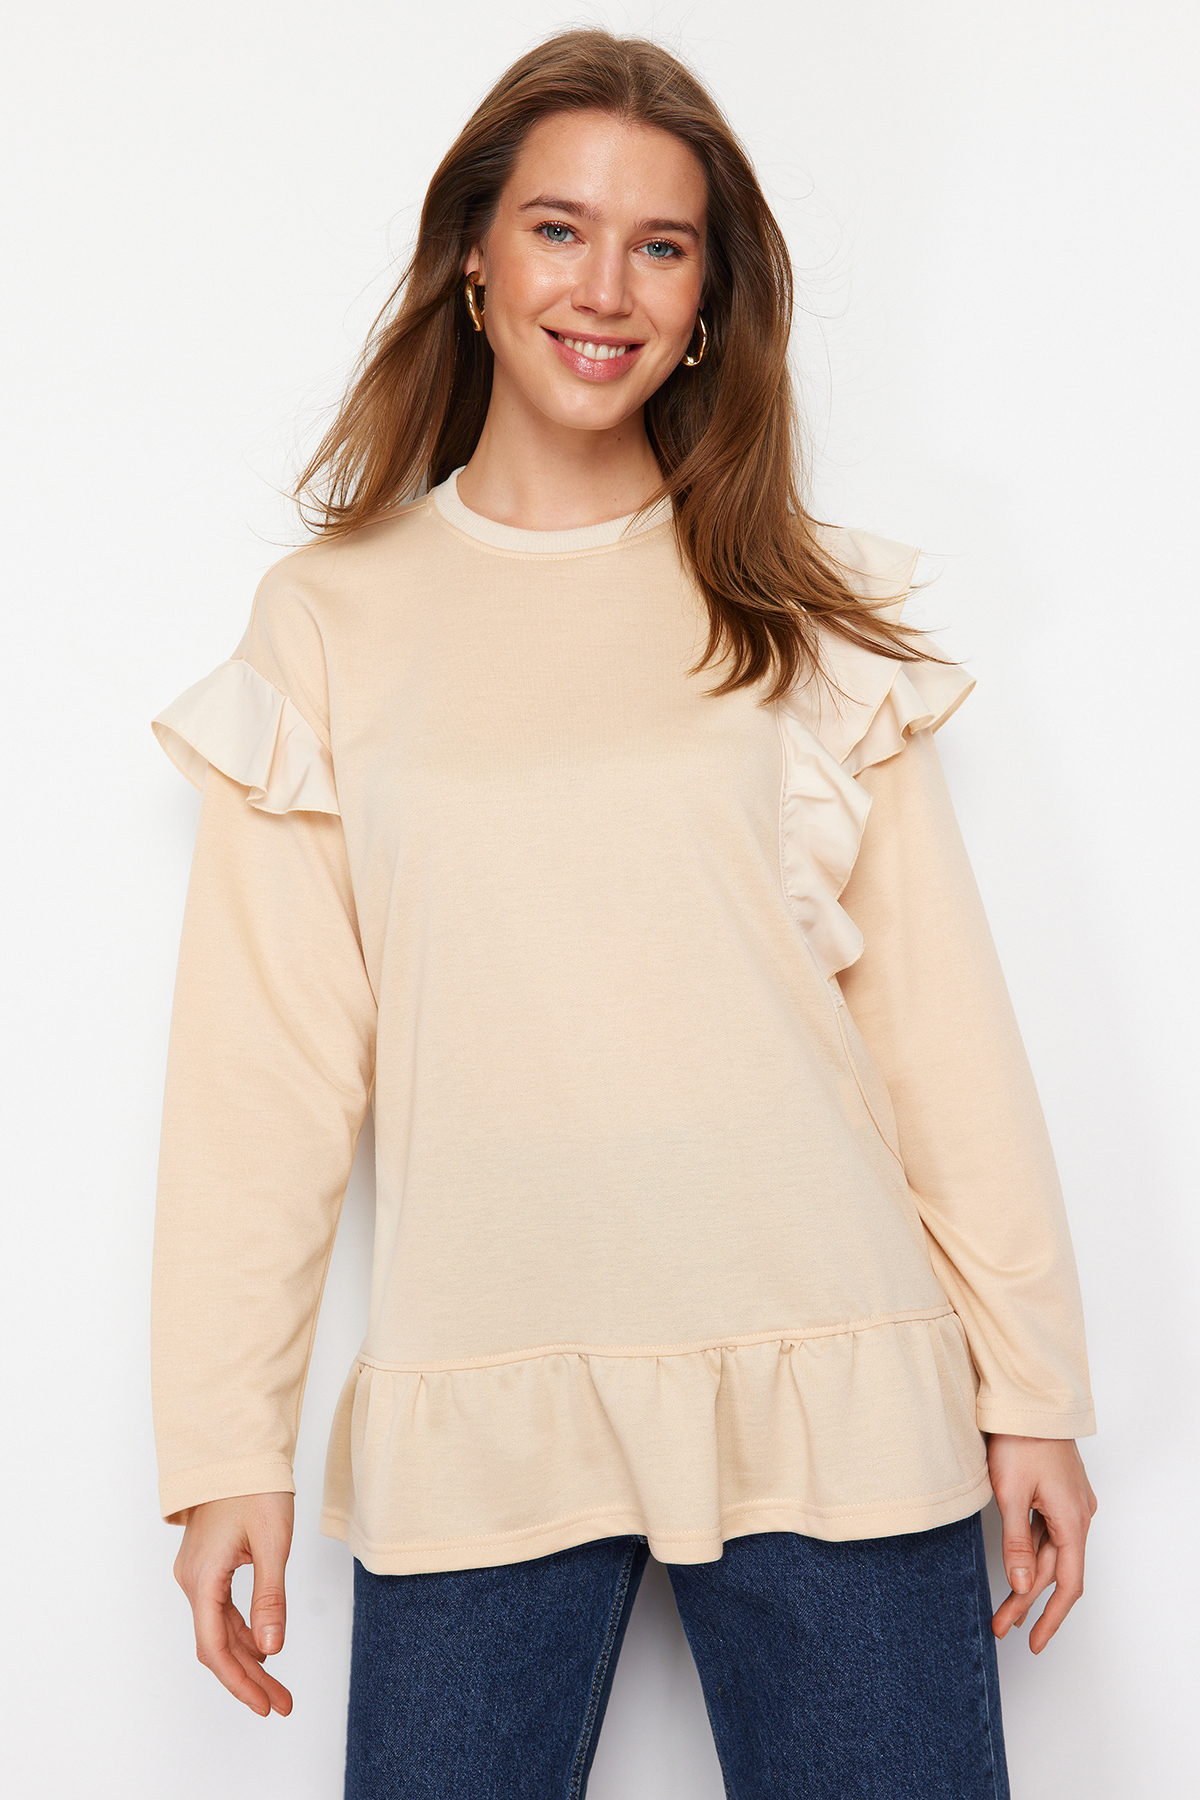 Trendyol Beige Ruffle Detailed Knitted Tunic